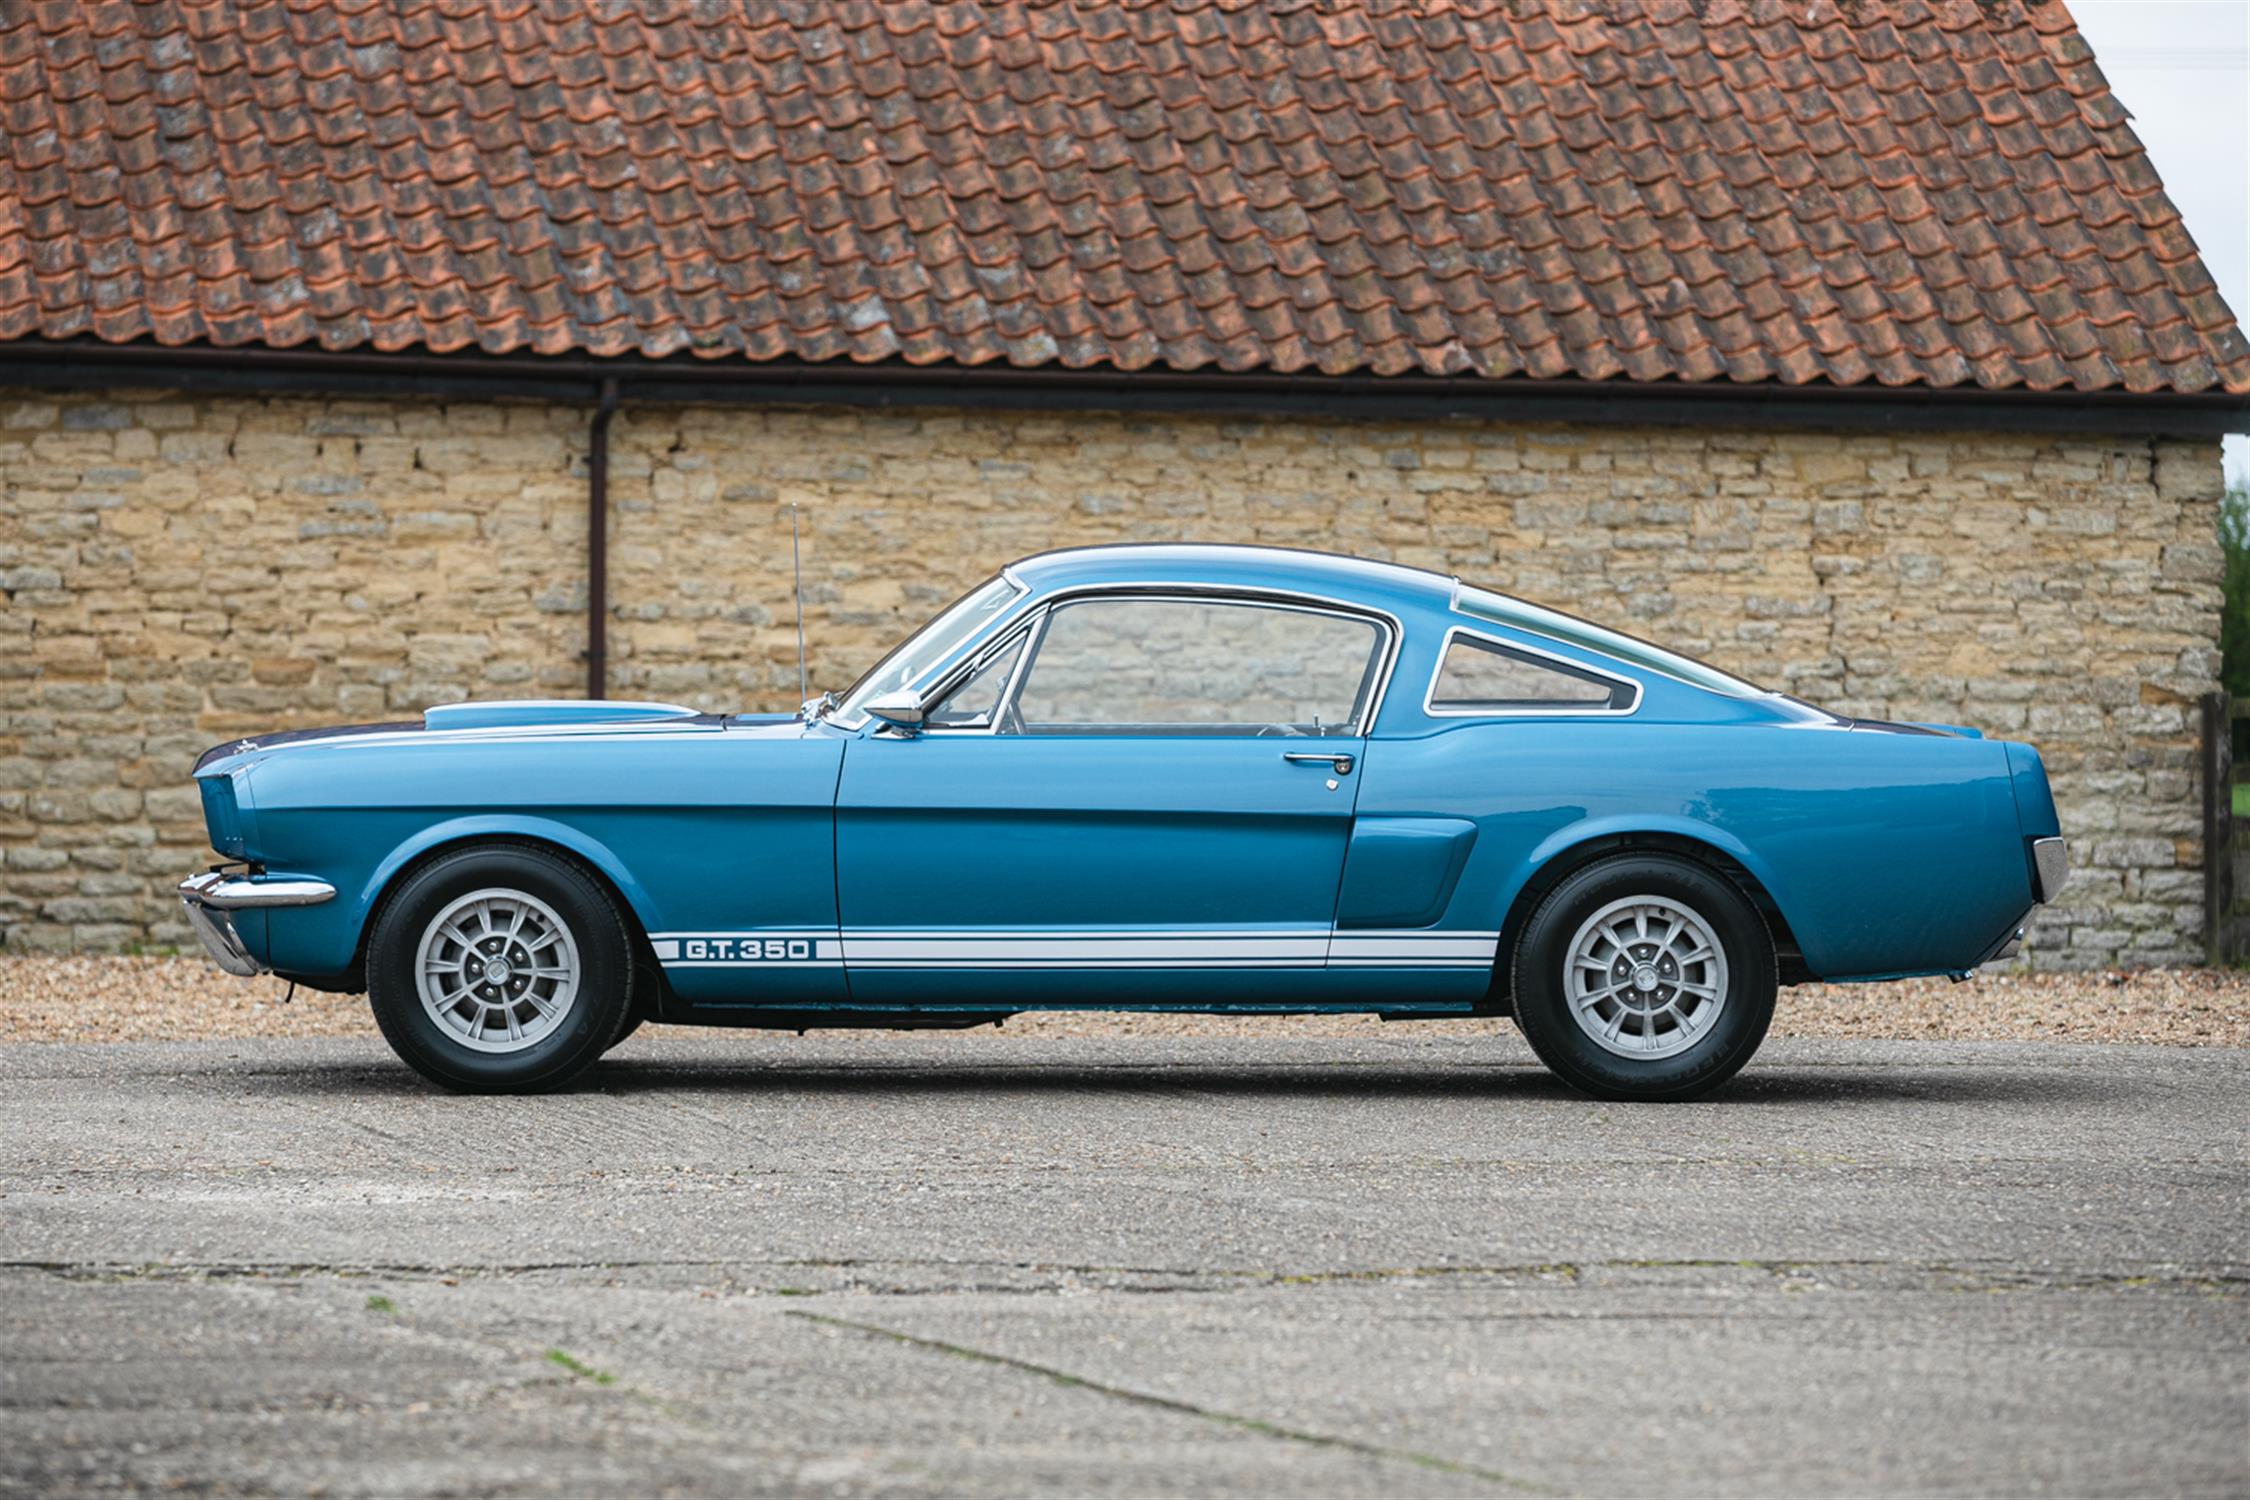 1966 Ford Shelby Mustang GT350 - Image 7 of 10